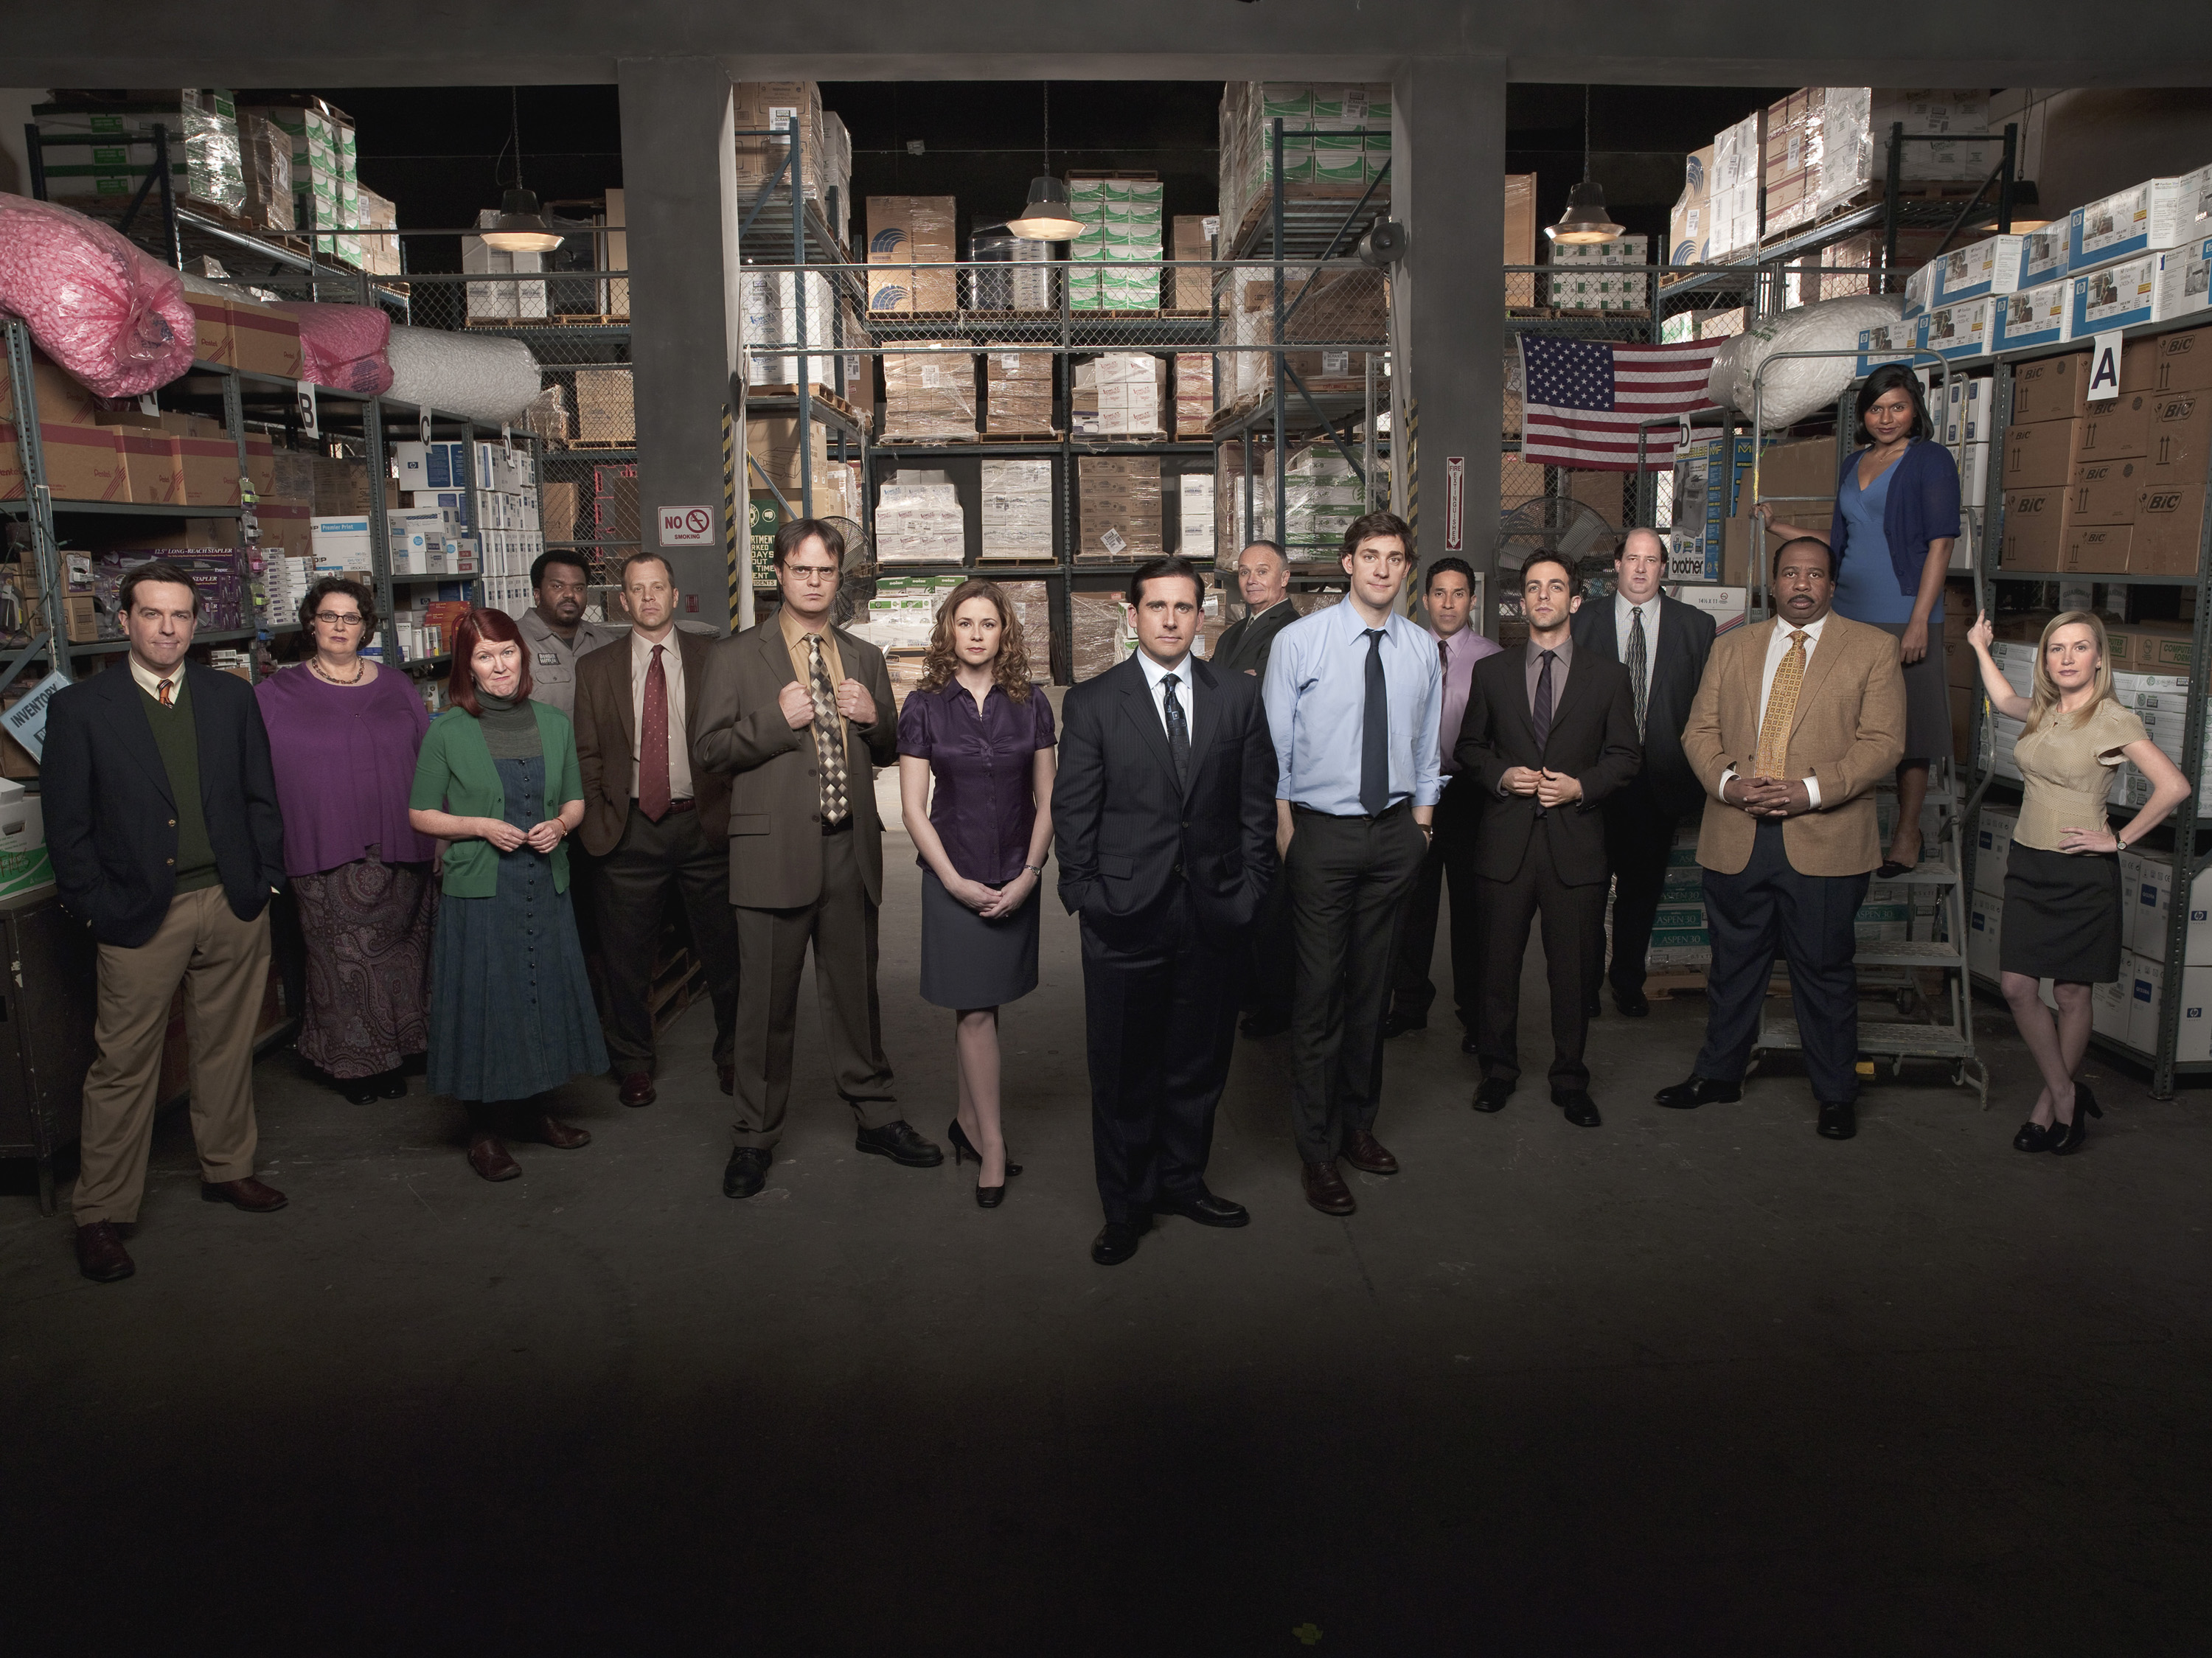 'The Office' Cast